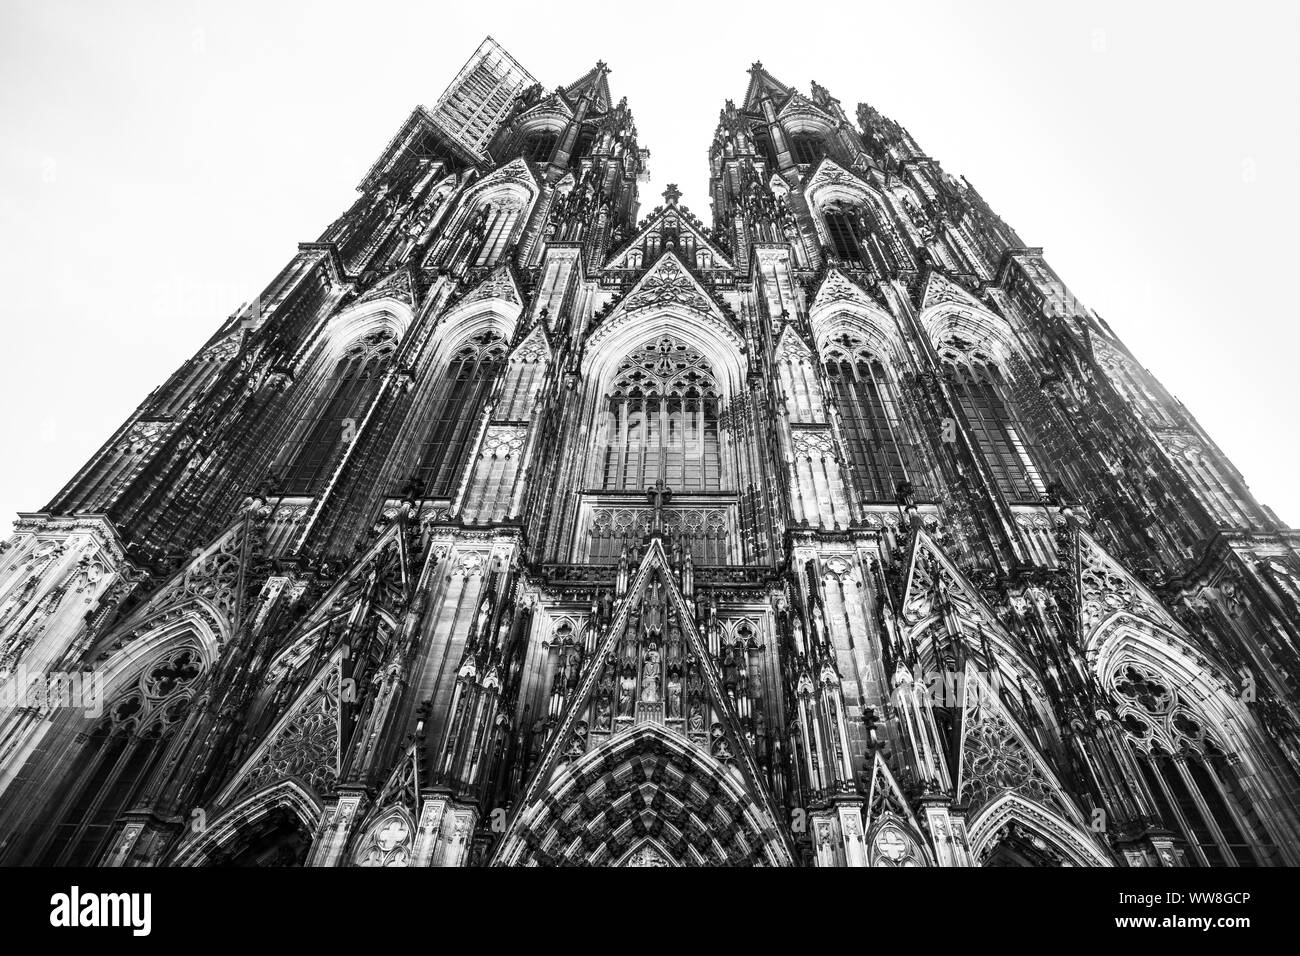 Historic Cologne Germany Cathedral in black and white Stock Photo